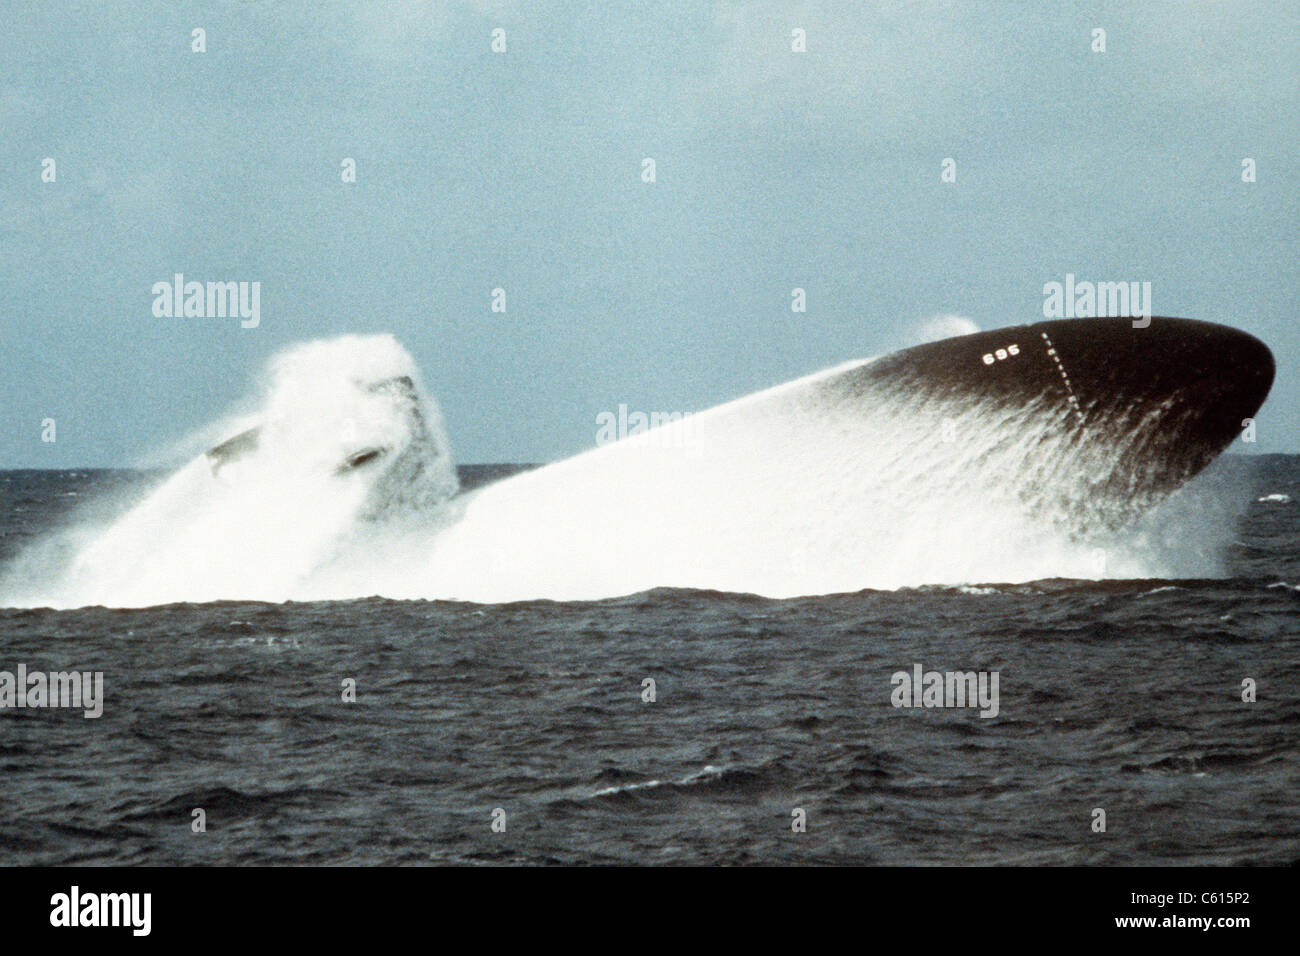 The nuclear-powered attack submarine BIRMINGHAM conducting an emergency surfacing exercise during sea trials. Nov. 19 1978. (BSLOC 2011 12 250) Stock Photo